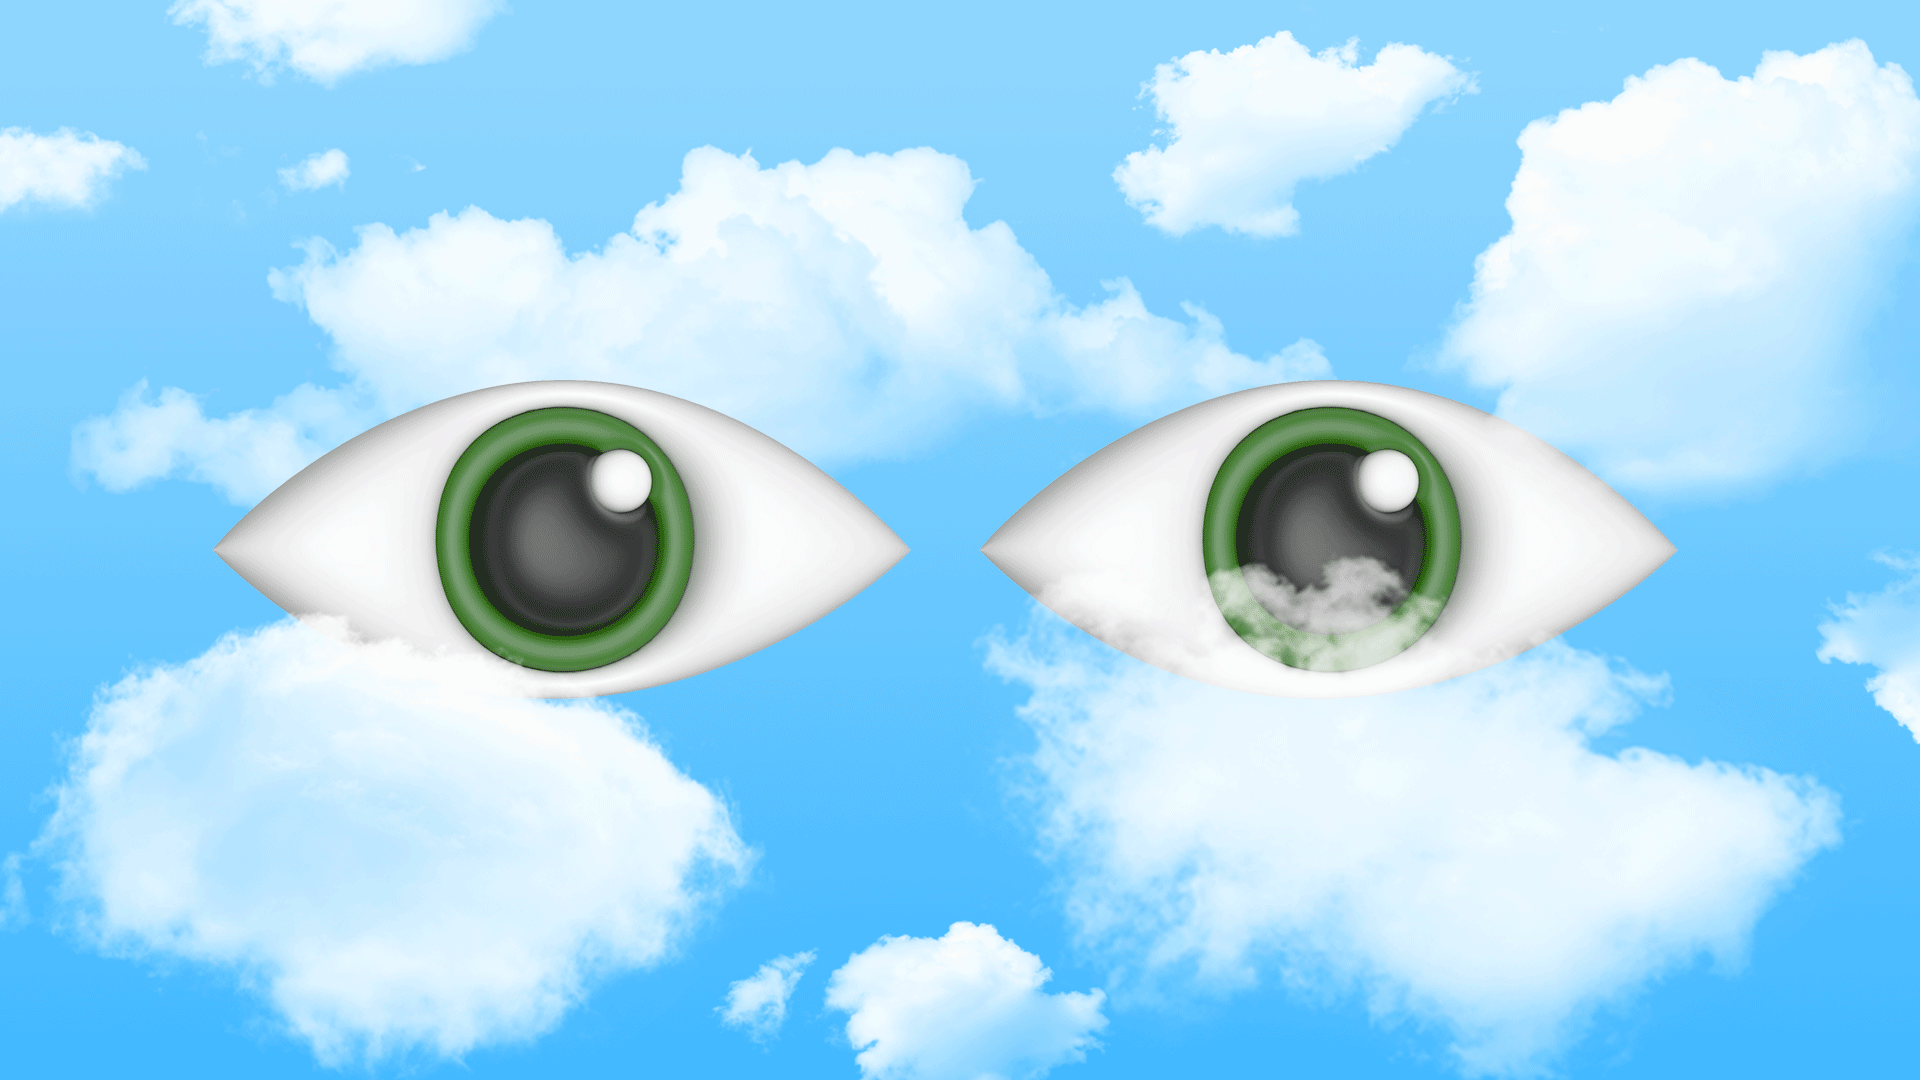 Illustration of eyes floating in the clouds looking from side to side